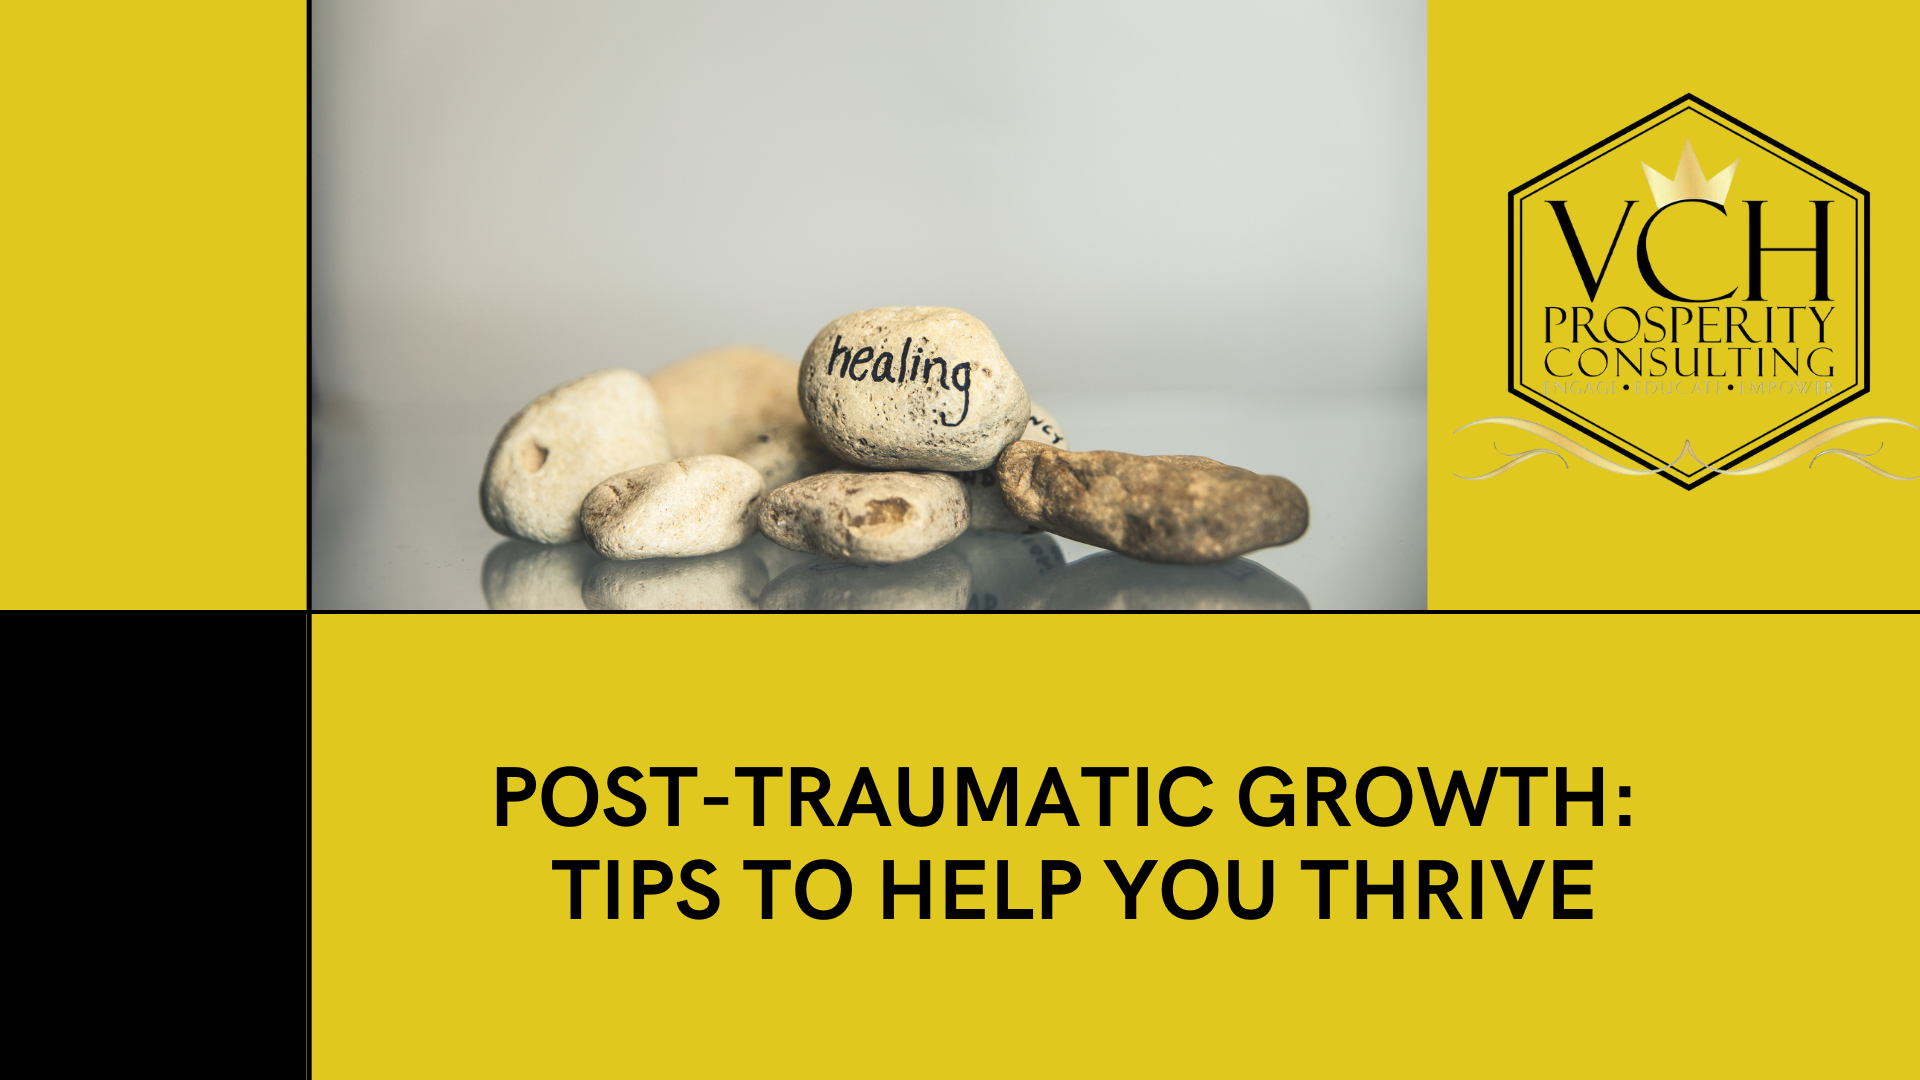 Recording of Post-Traumatic Growth Tips to Help You Thrive